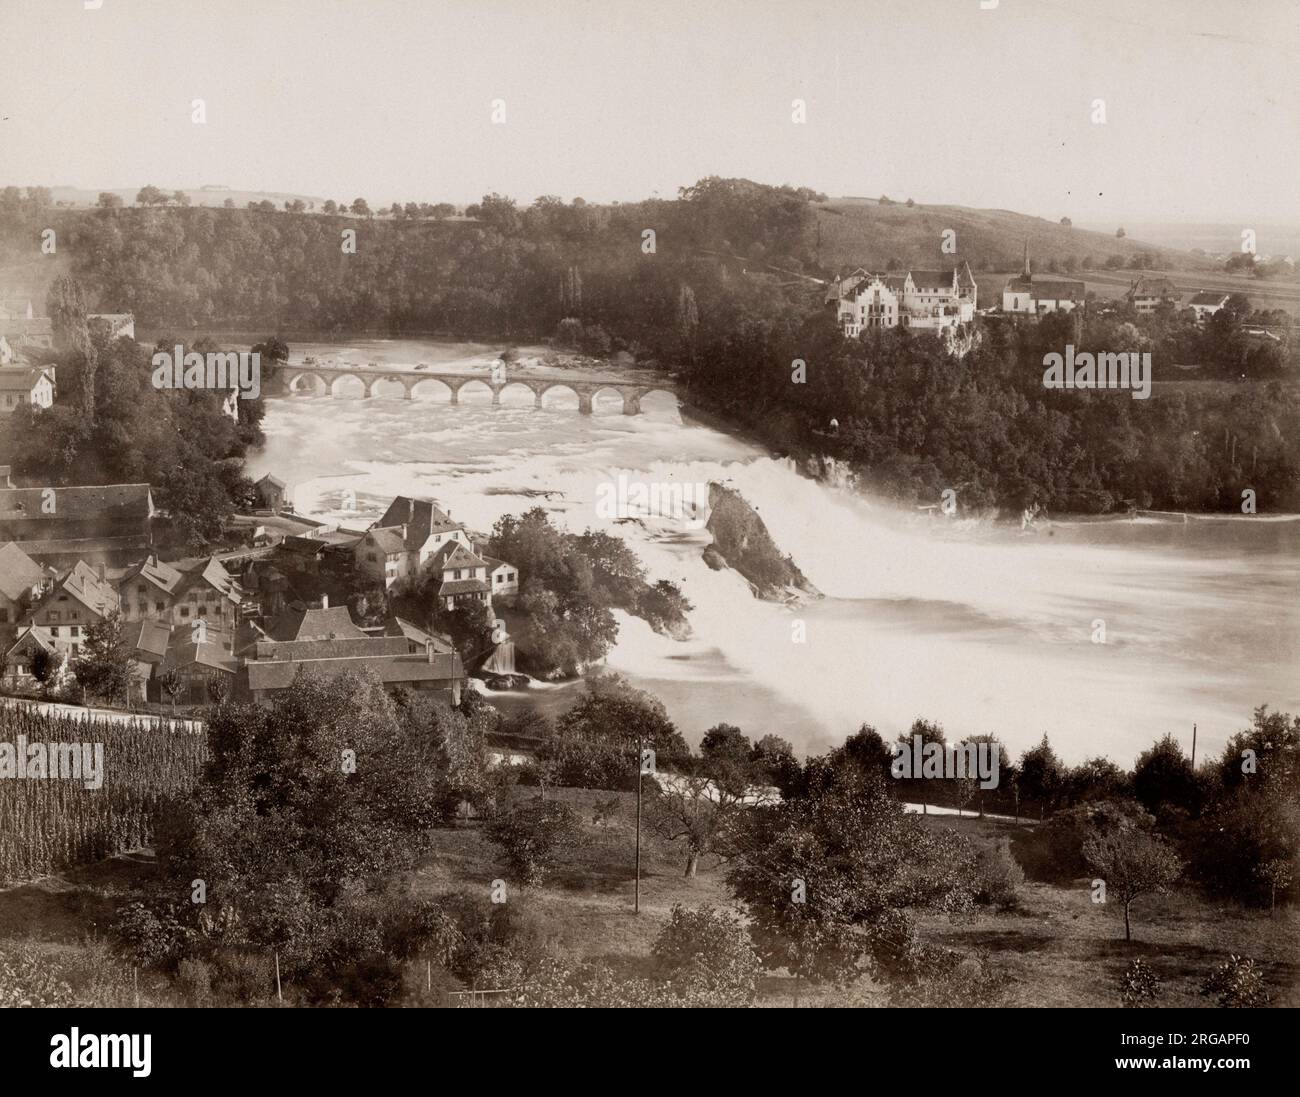 Vintage 19th century photograph: Switzerland, c.1880's - Rhine Falls. The Rhine Falls is a waterfall located in Switzerland and the most powerful waterfall in Europe. The falls are located on the High Rhine on the border between the cantons of Schaffhausen and Zorich Stock Photo